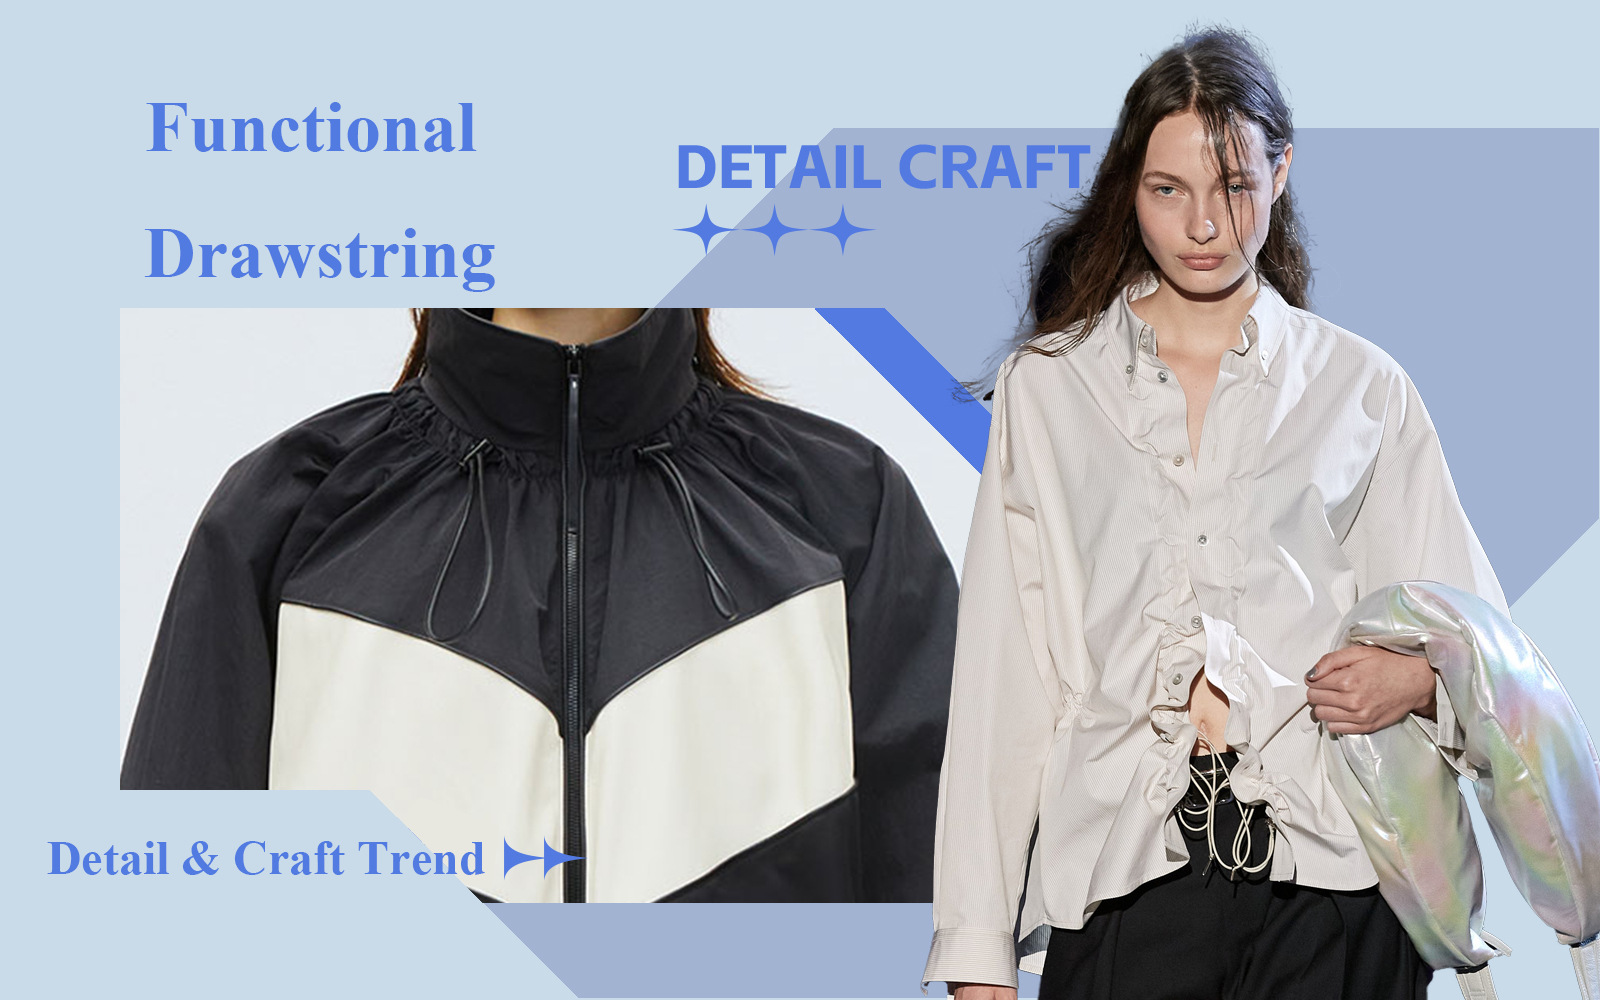 Functional Drawstring -- The Detail & Craft Trend for Womenswear